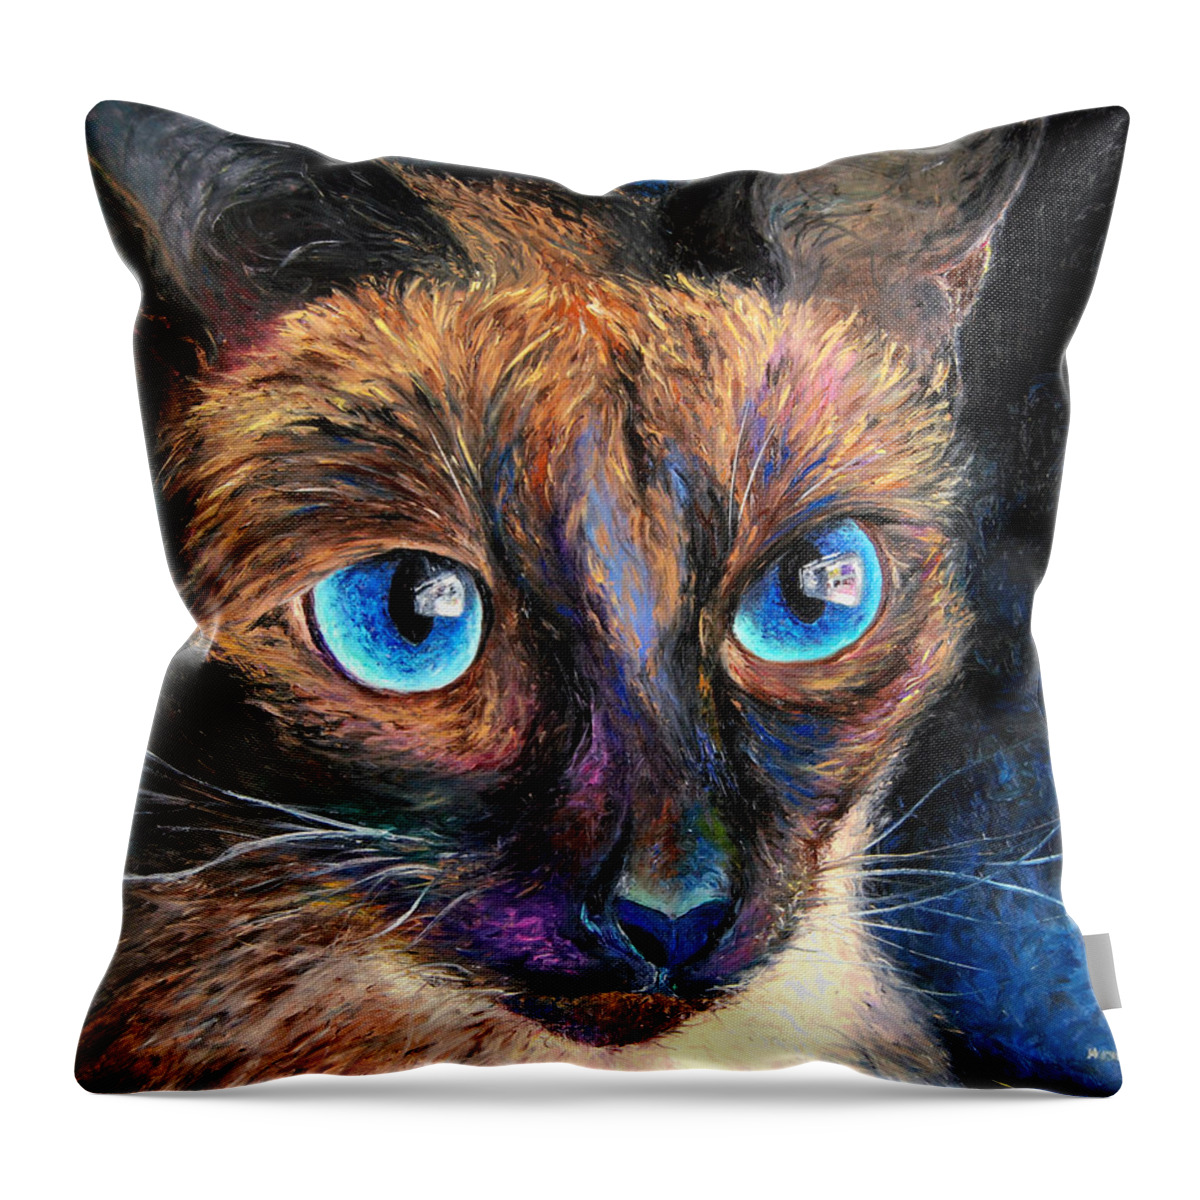 Catart Throw Pillow featuring the painting My whole world by Hafsa Idrees